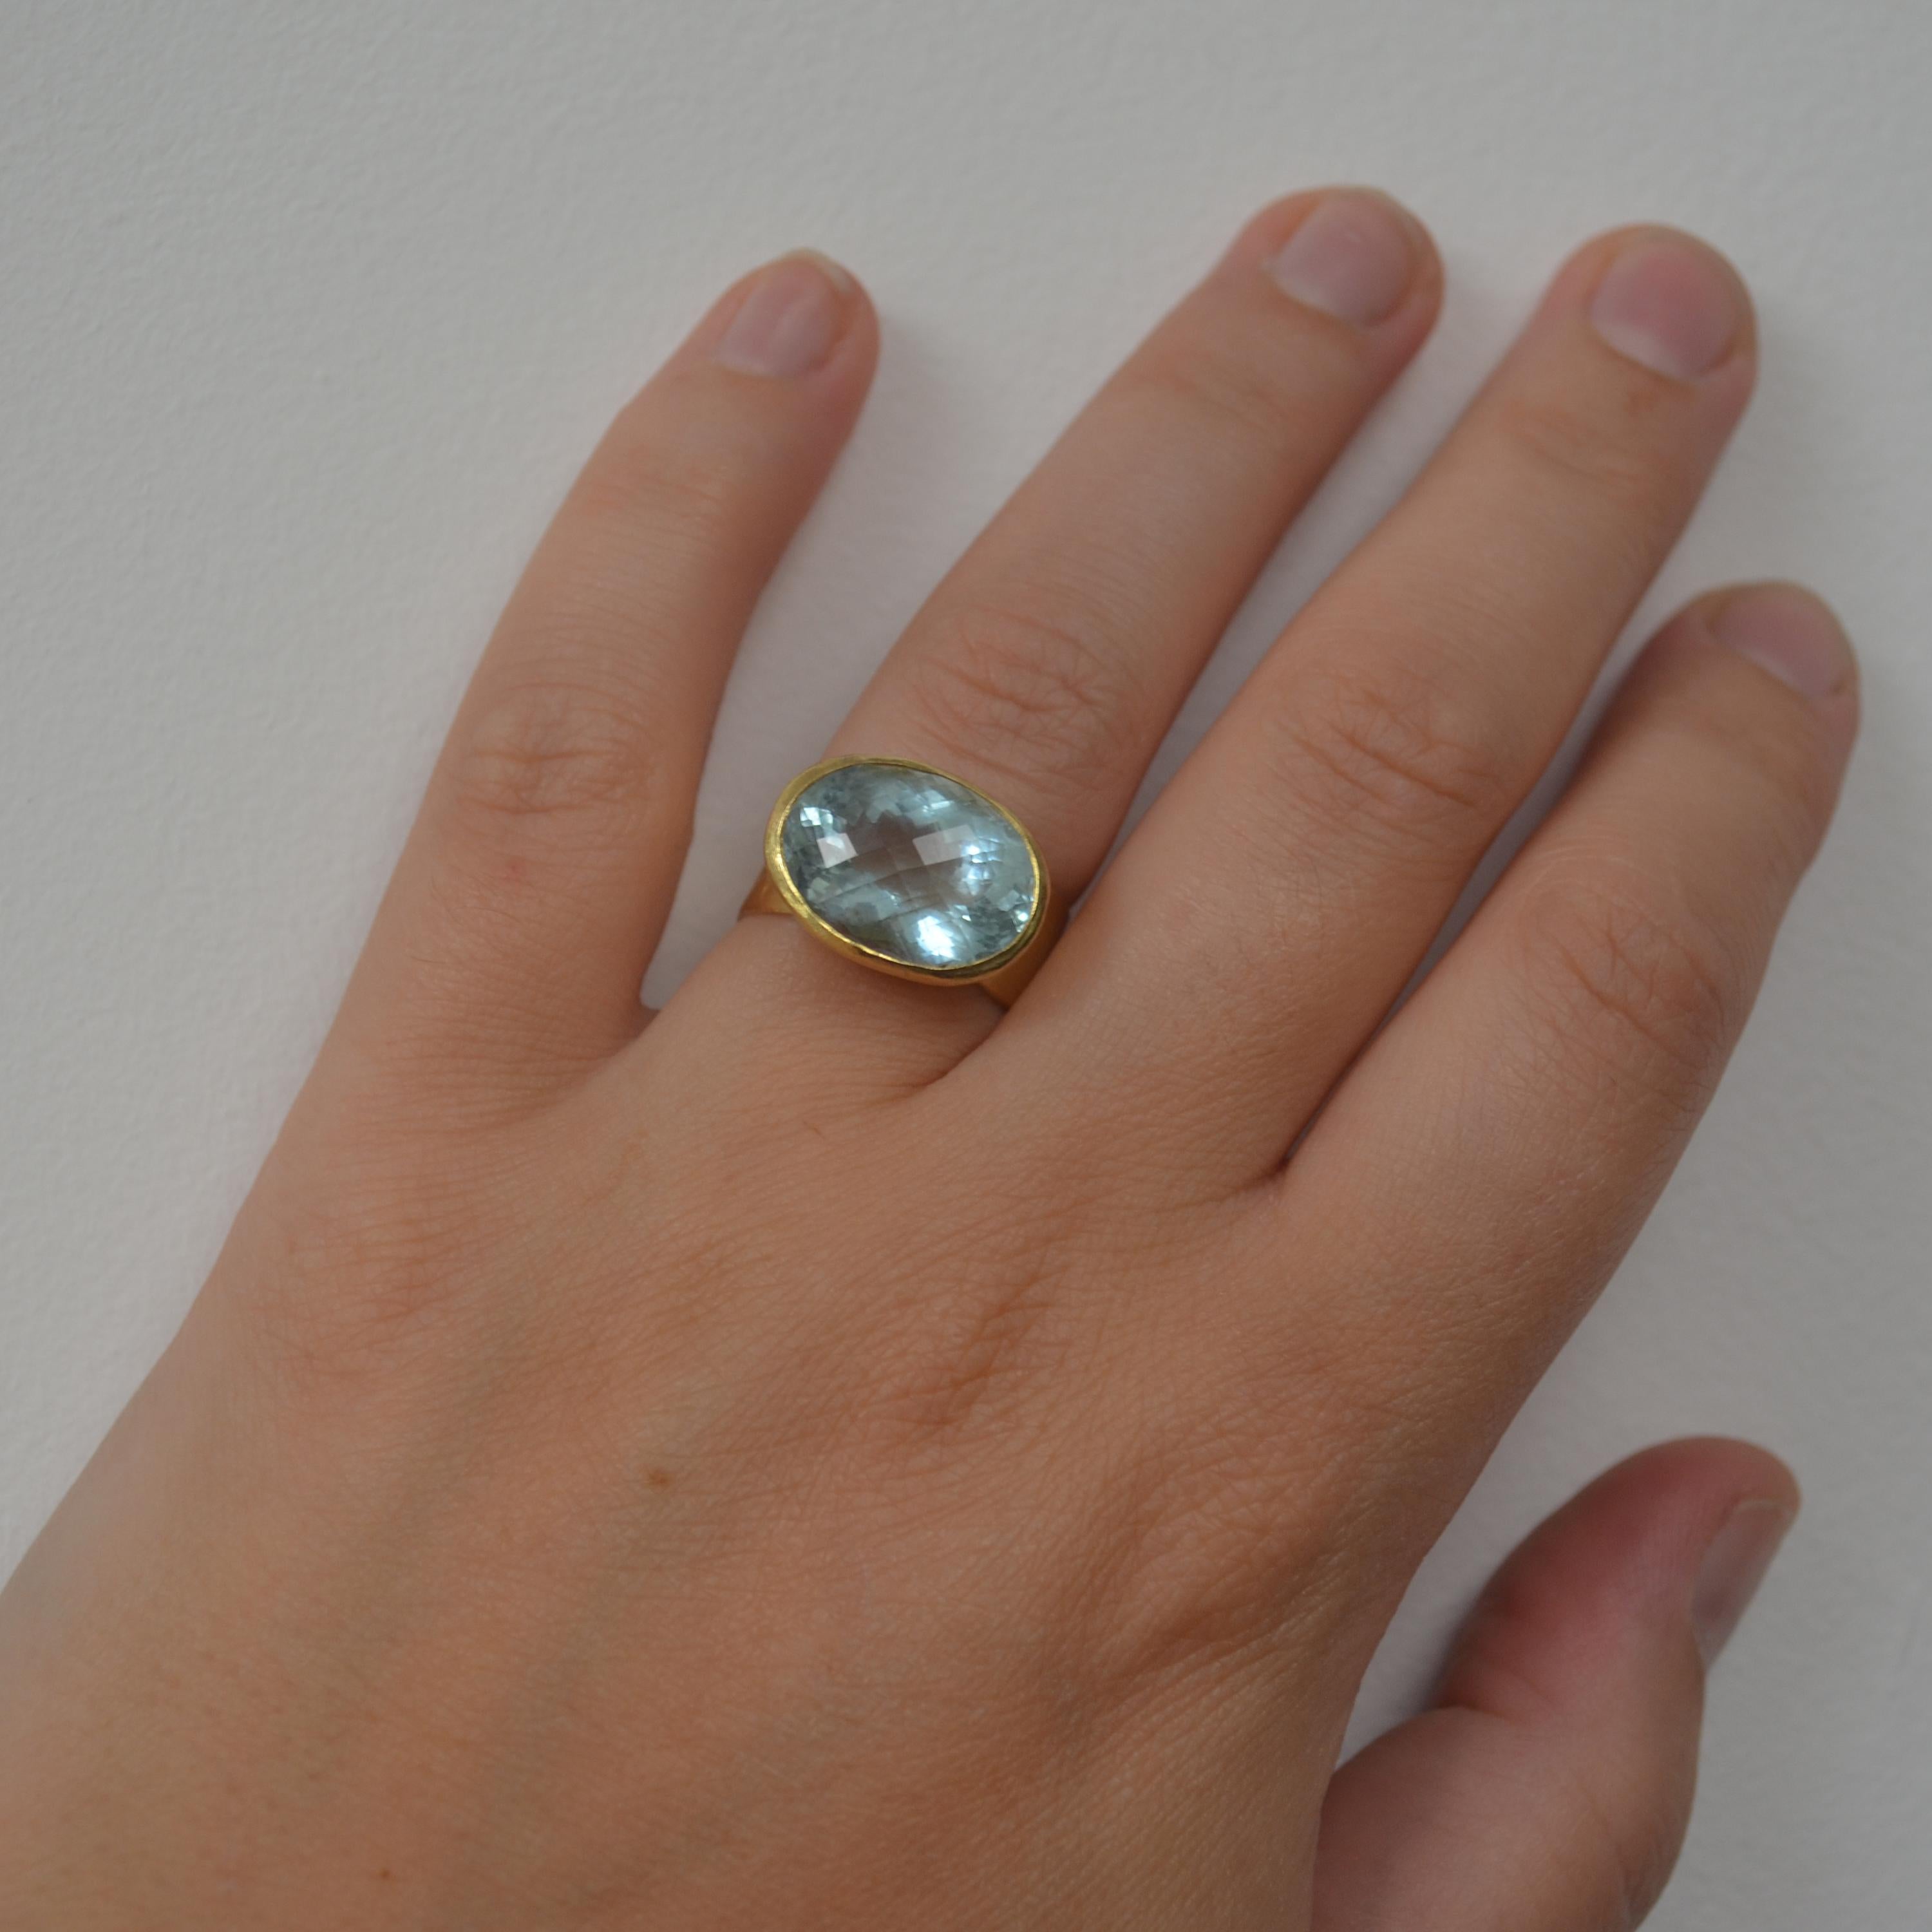 Chequerboard Cut Aquamarine Wide 18k Gold Cocktail Ring Handmade by Disa Allsopp 1